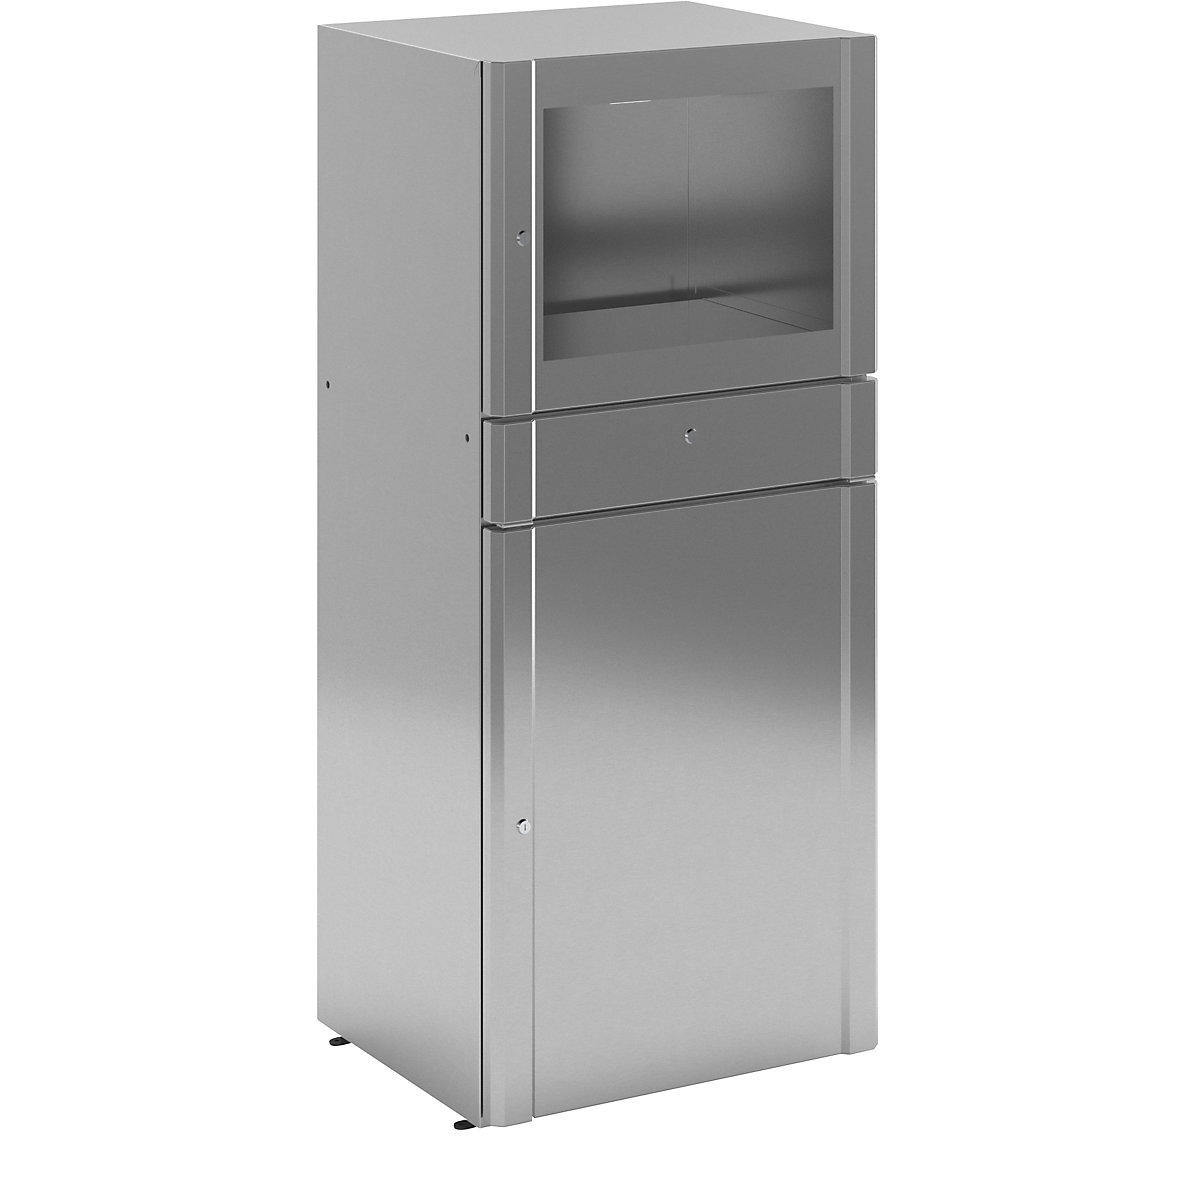 Stainless steel PC cupboard